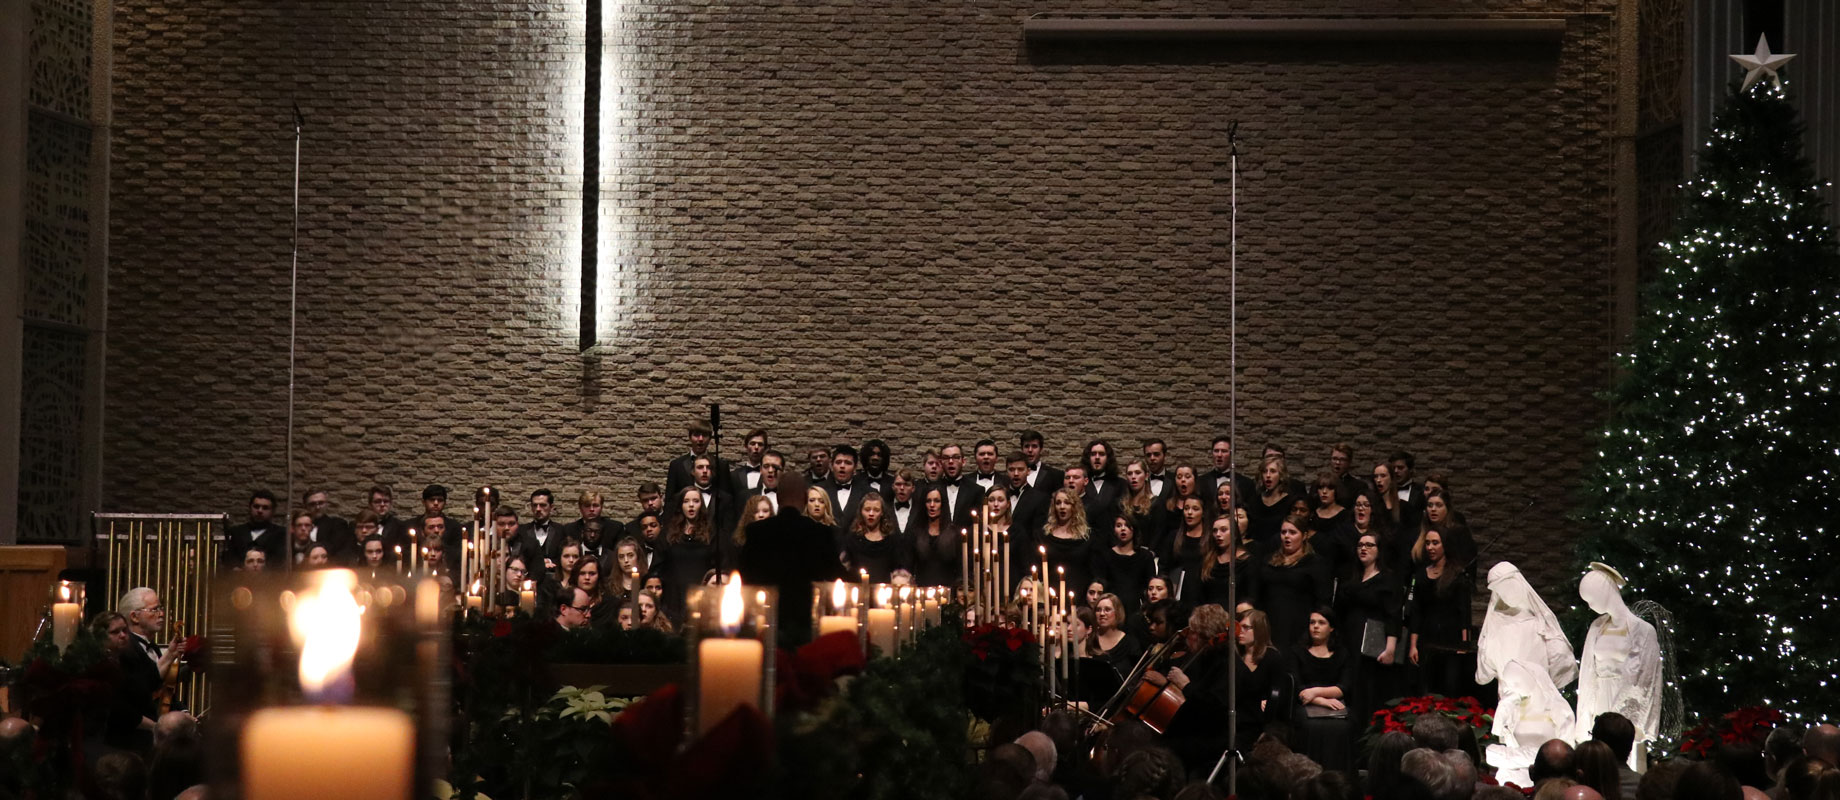 Simpson College students perform at Lessons and Carols in 2017.